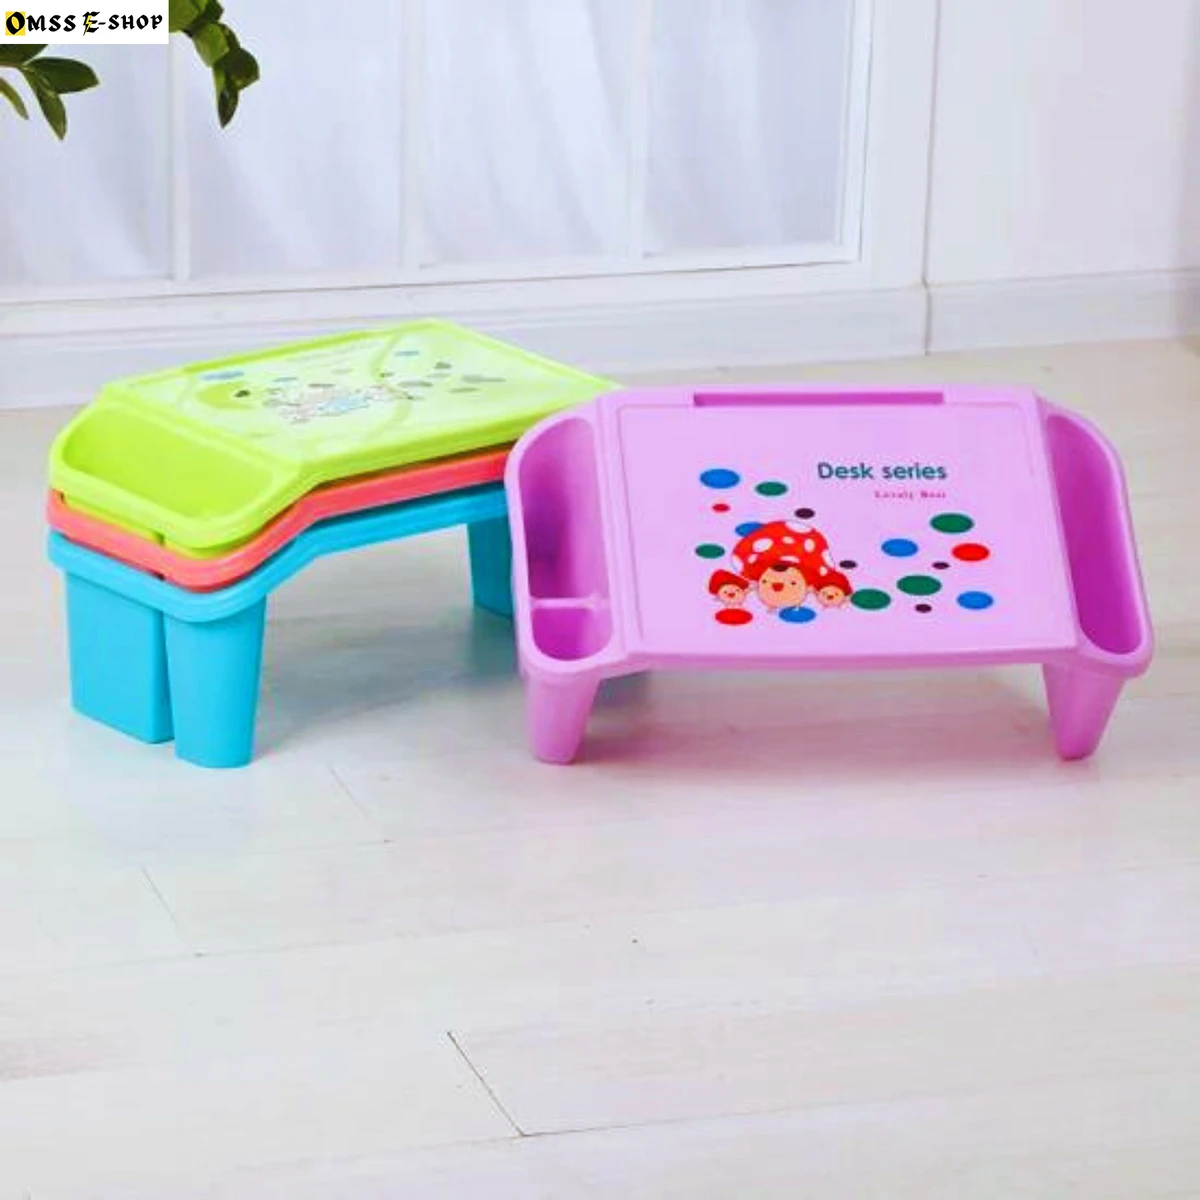 Plastic Mini Multi-functional Study Table for Kids Toddlers Baby Desk with Holder Organizer Portable Laptop Desk Durable Safe Material for Children